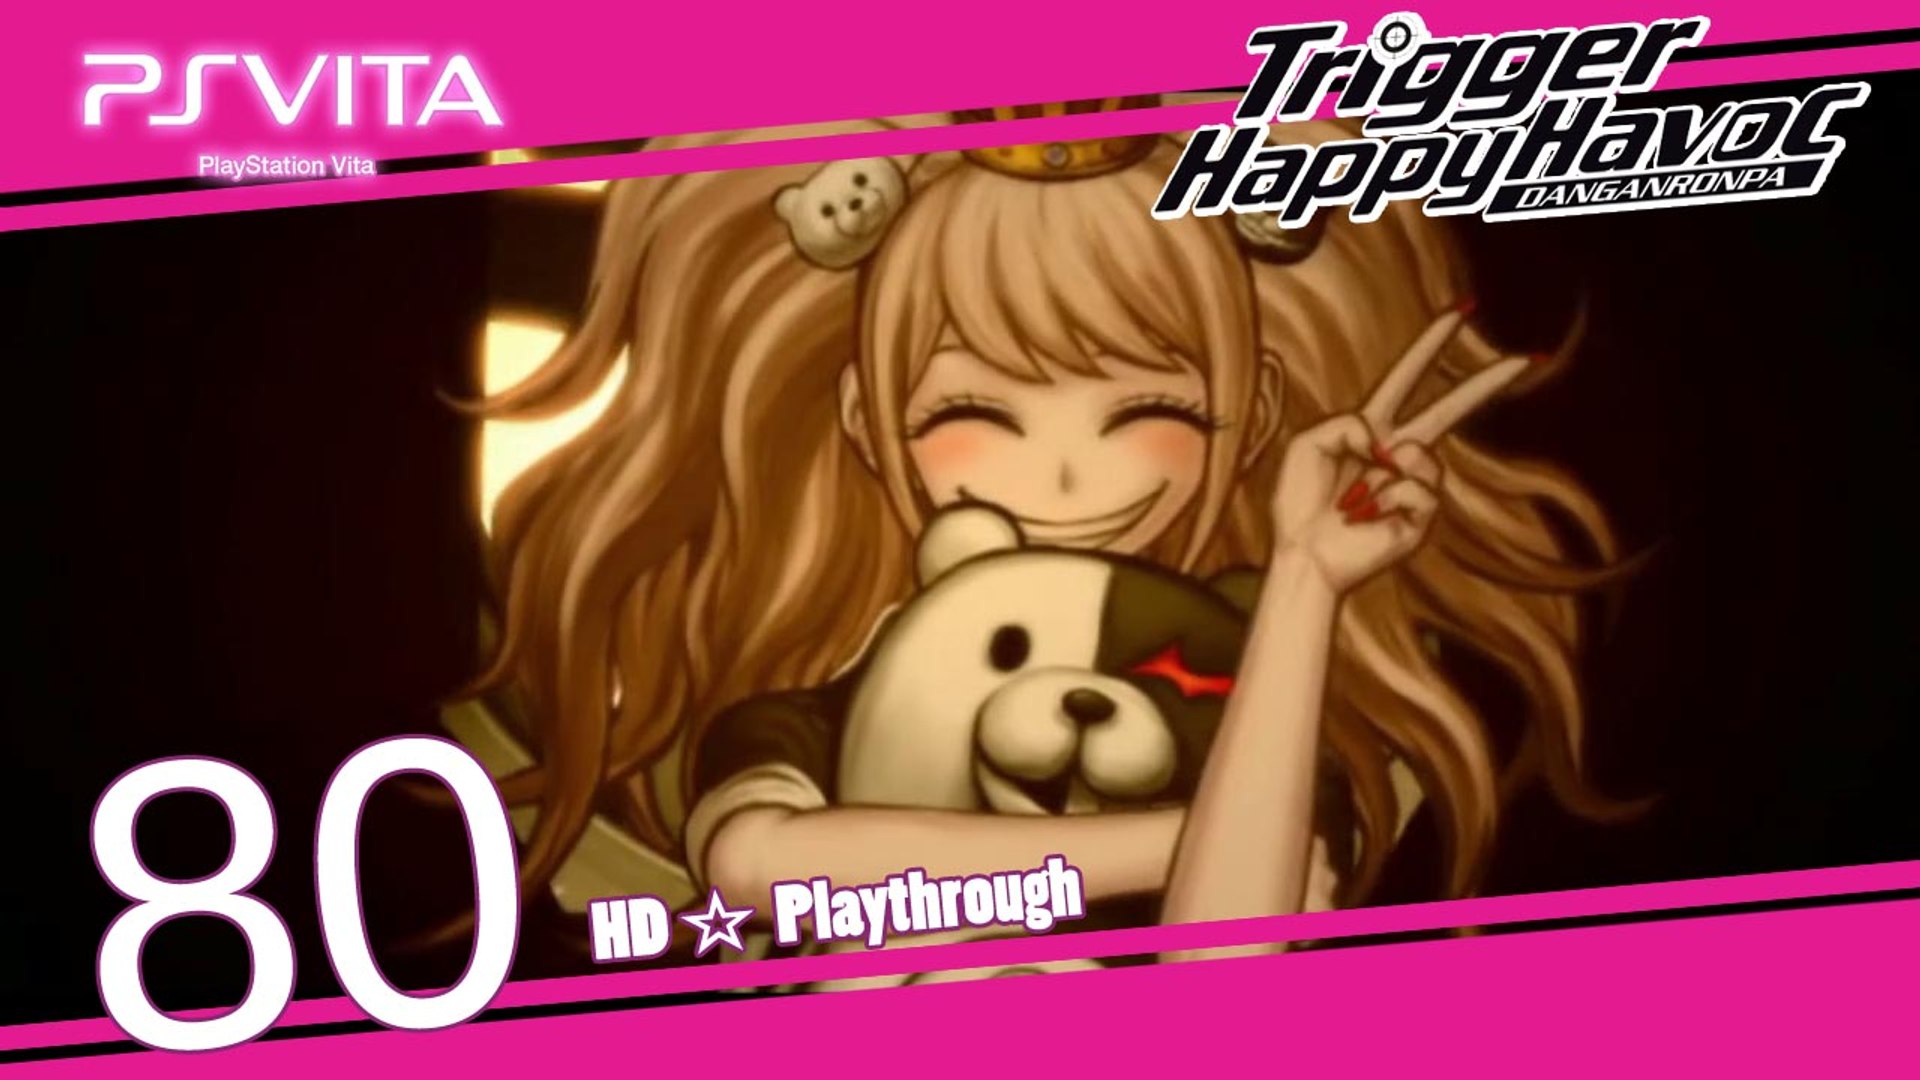 Danganronpa Trigger Happy Havoc Psv Pt 80 Chapter 6 Ultimate Pain Ultimate Suffering Ultimate Despair Ultimate Execution Ultimate Death Class Trial Video Dailymotion